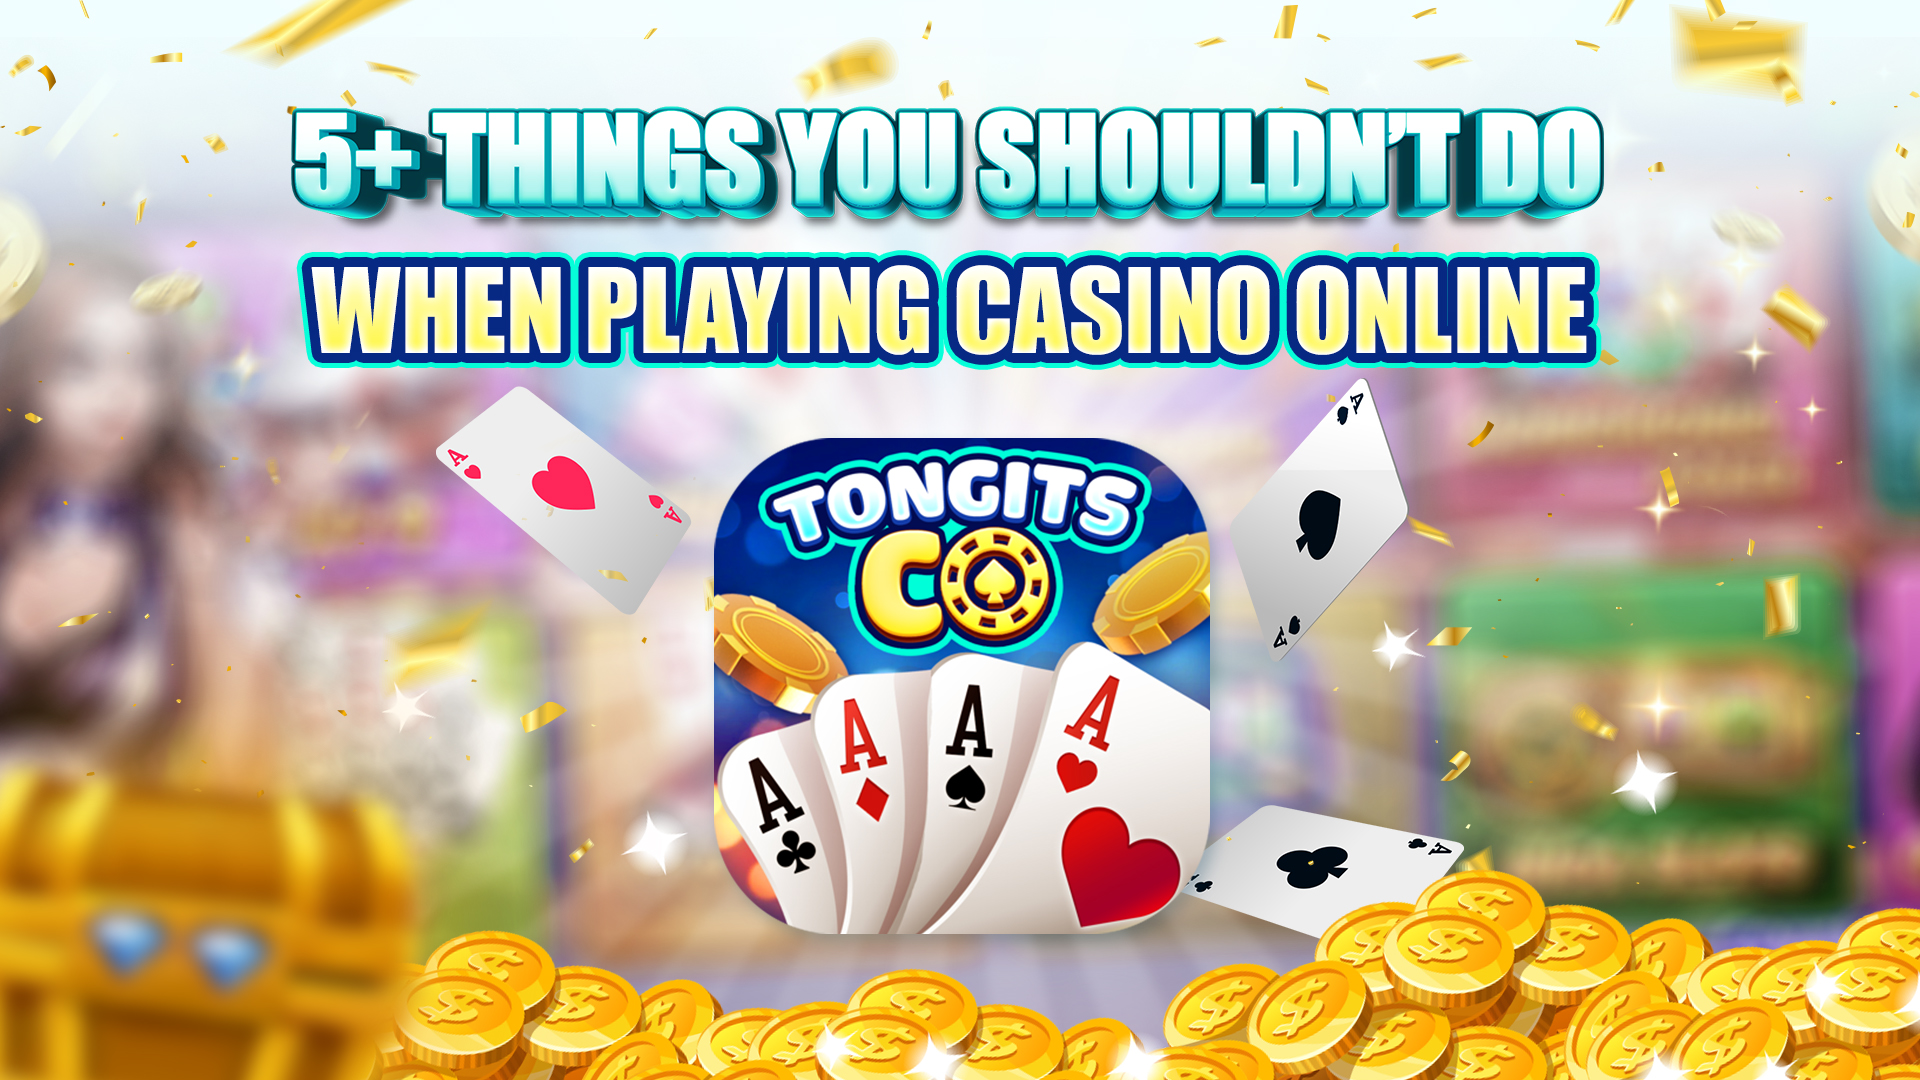 Tongits CO logo and 5+ things you shouldn't do when playing casino online